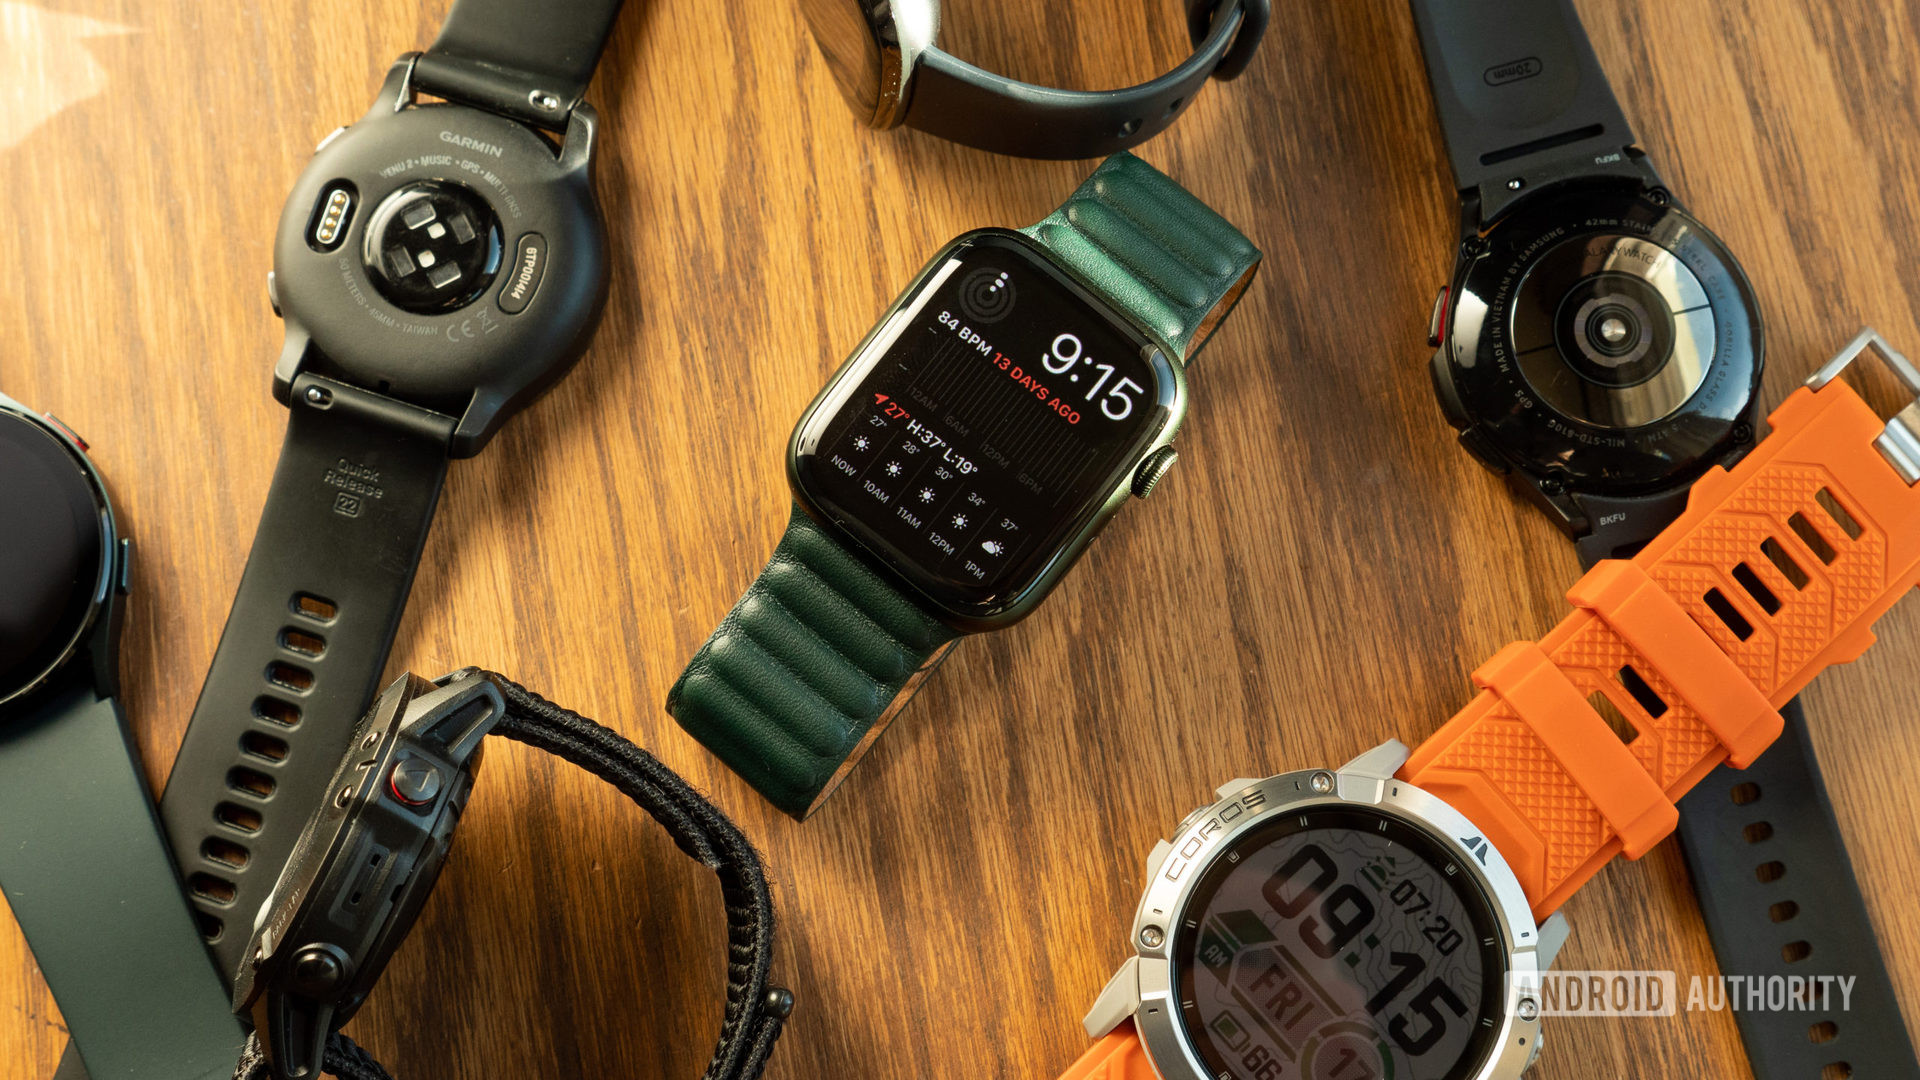 Apple Watch Series 7, Garmin Venue 2, Samsung Galaxy Watch 4, and more smartwatches are lying on a table.